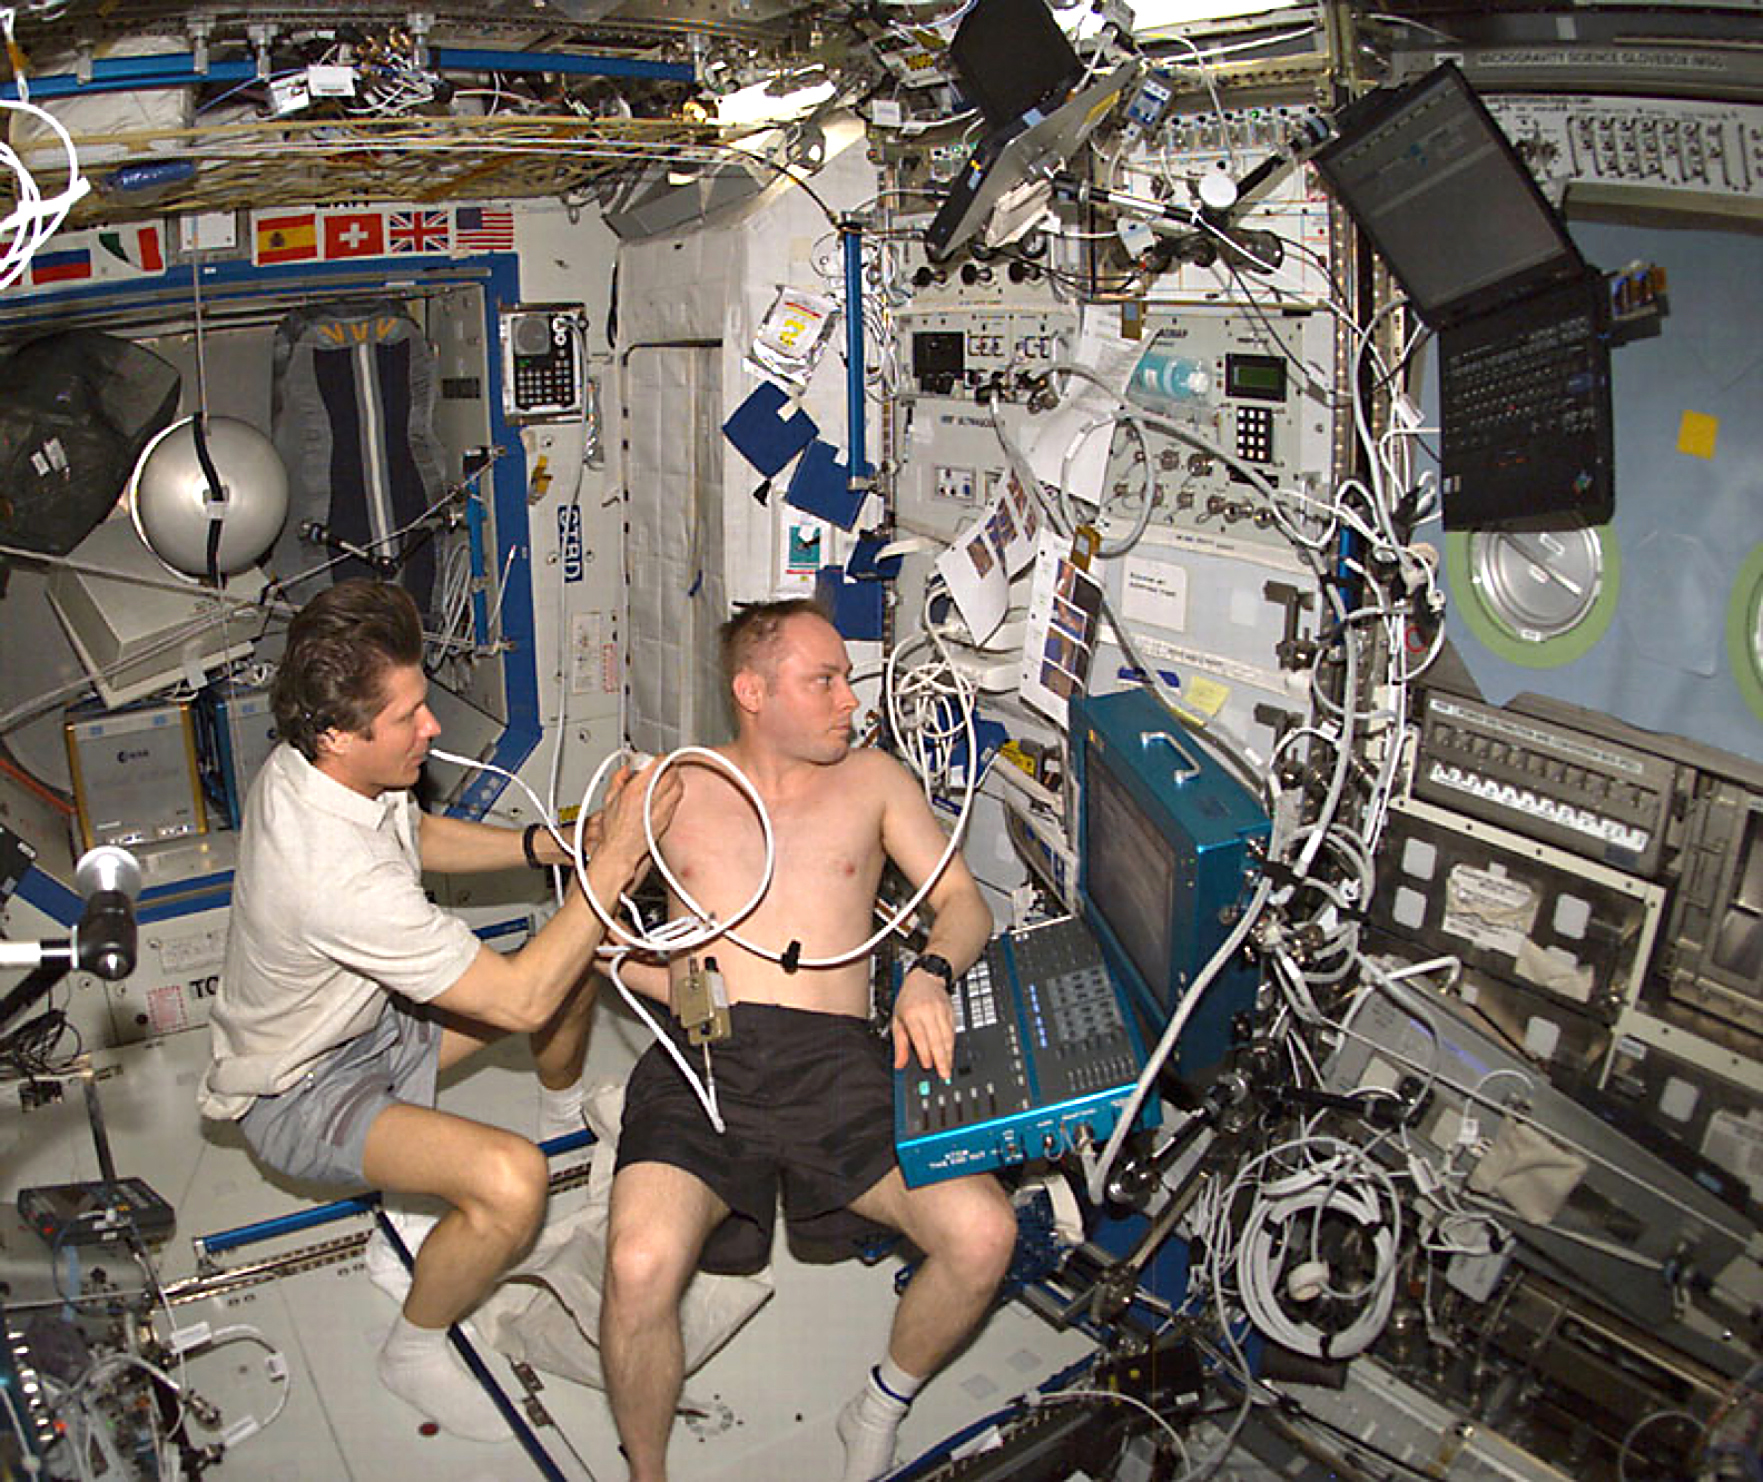 ultrasound procedures help provide for medical diagnoses on the International Space Station